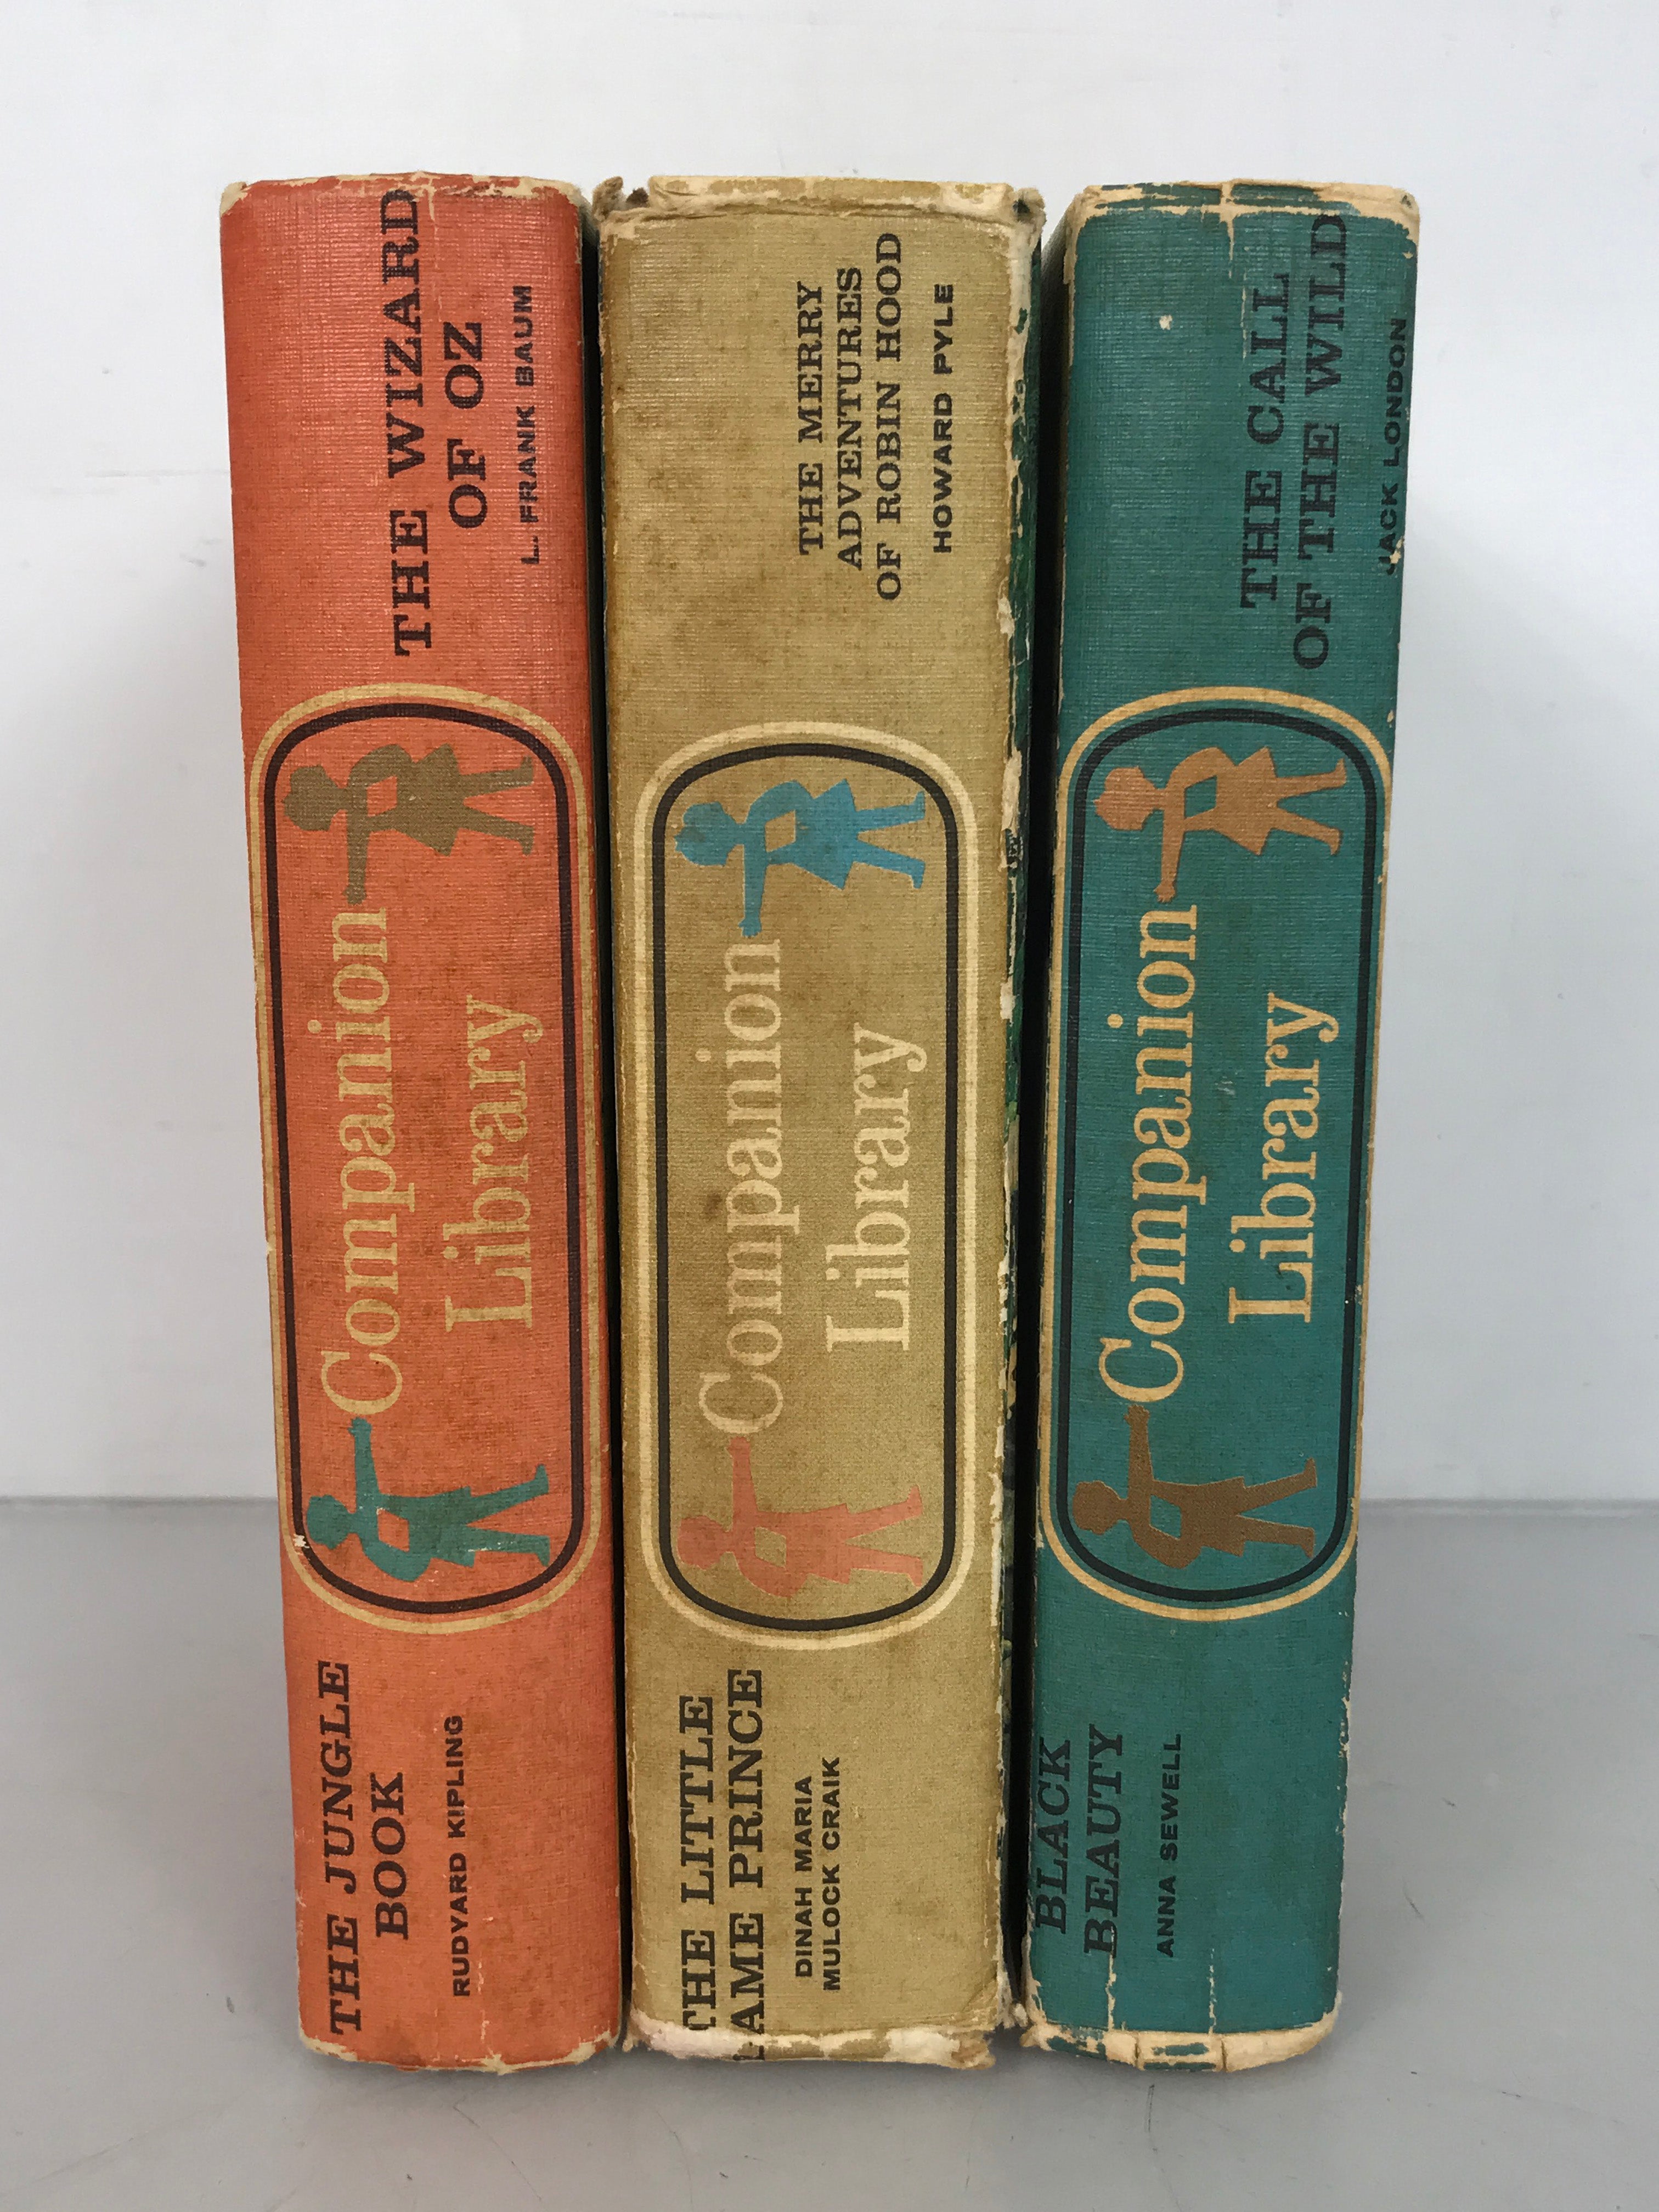 Lot of 3 Companion Library Classics The Wizard of Oz/The Jungle Book, Robin Hood/The Little Prince, and The Call of the Wild/Black Beauty HC